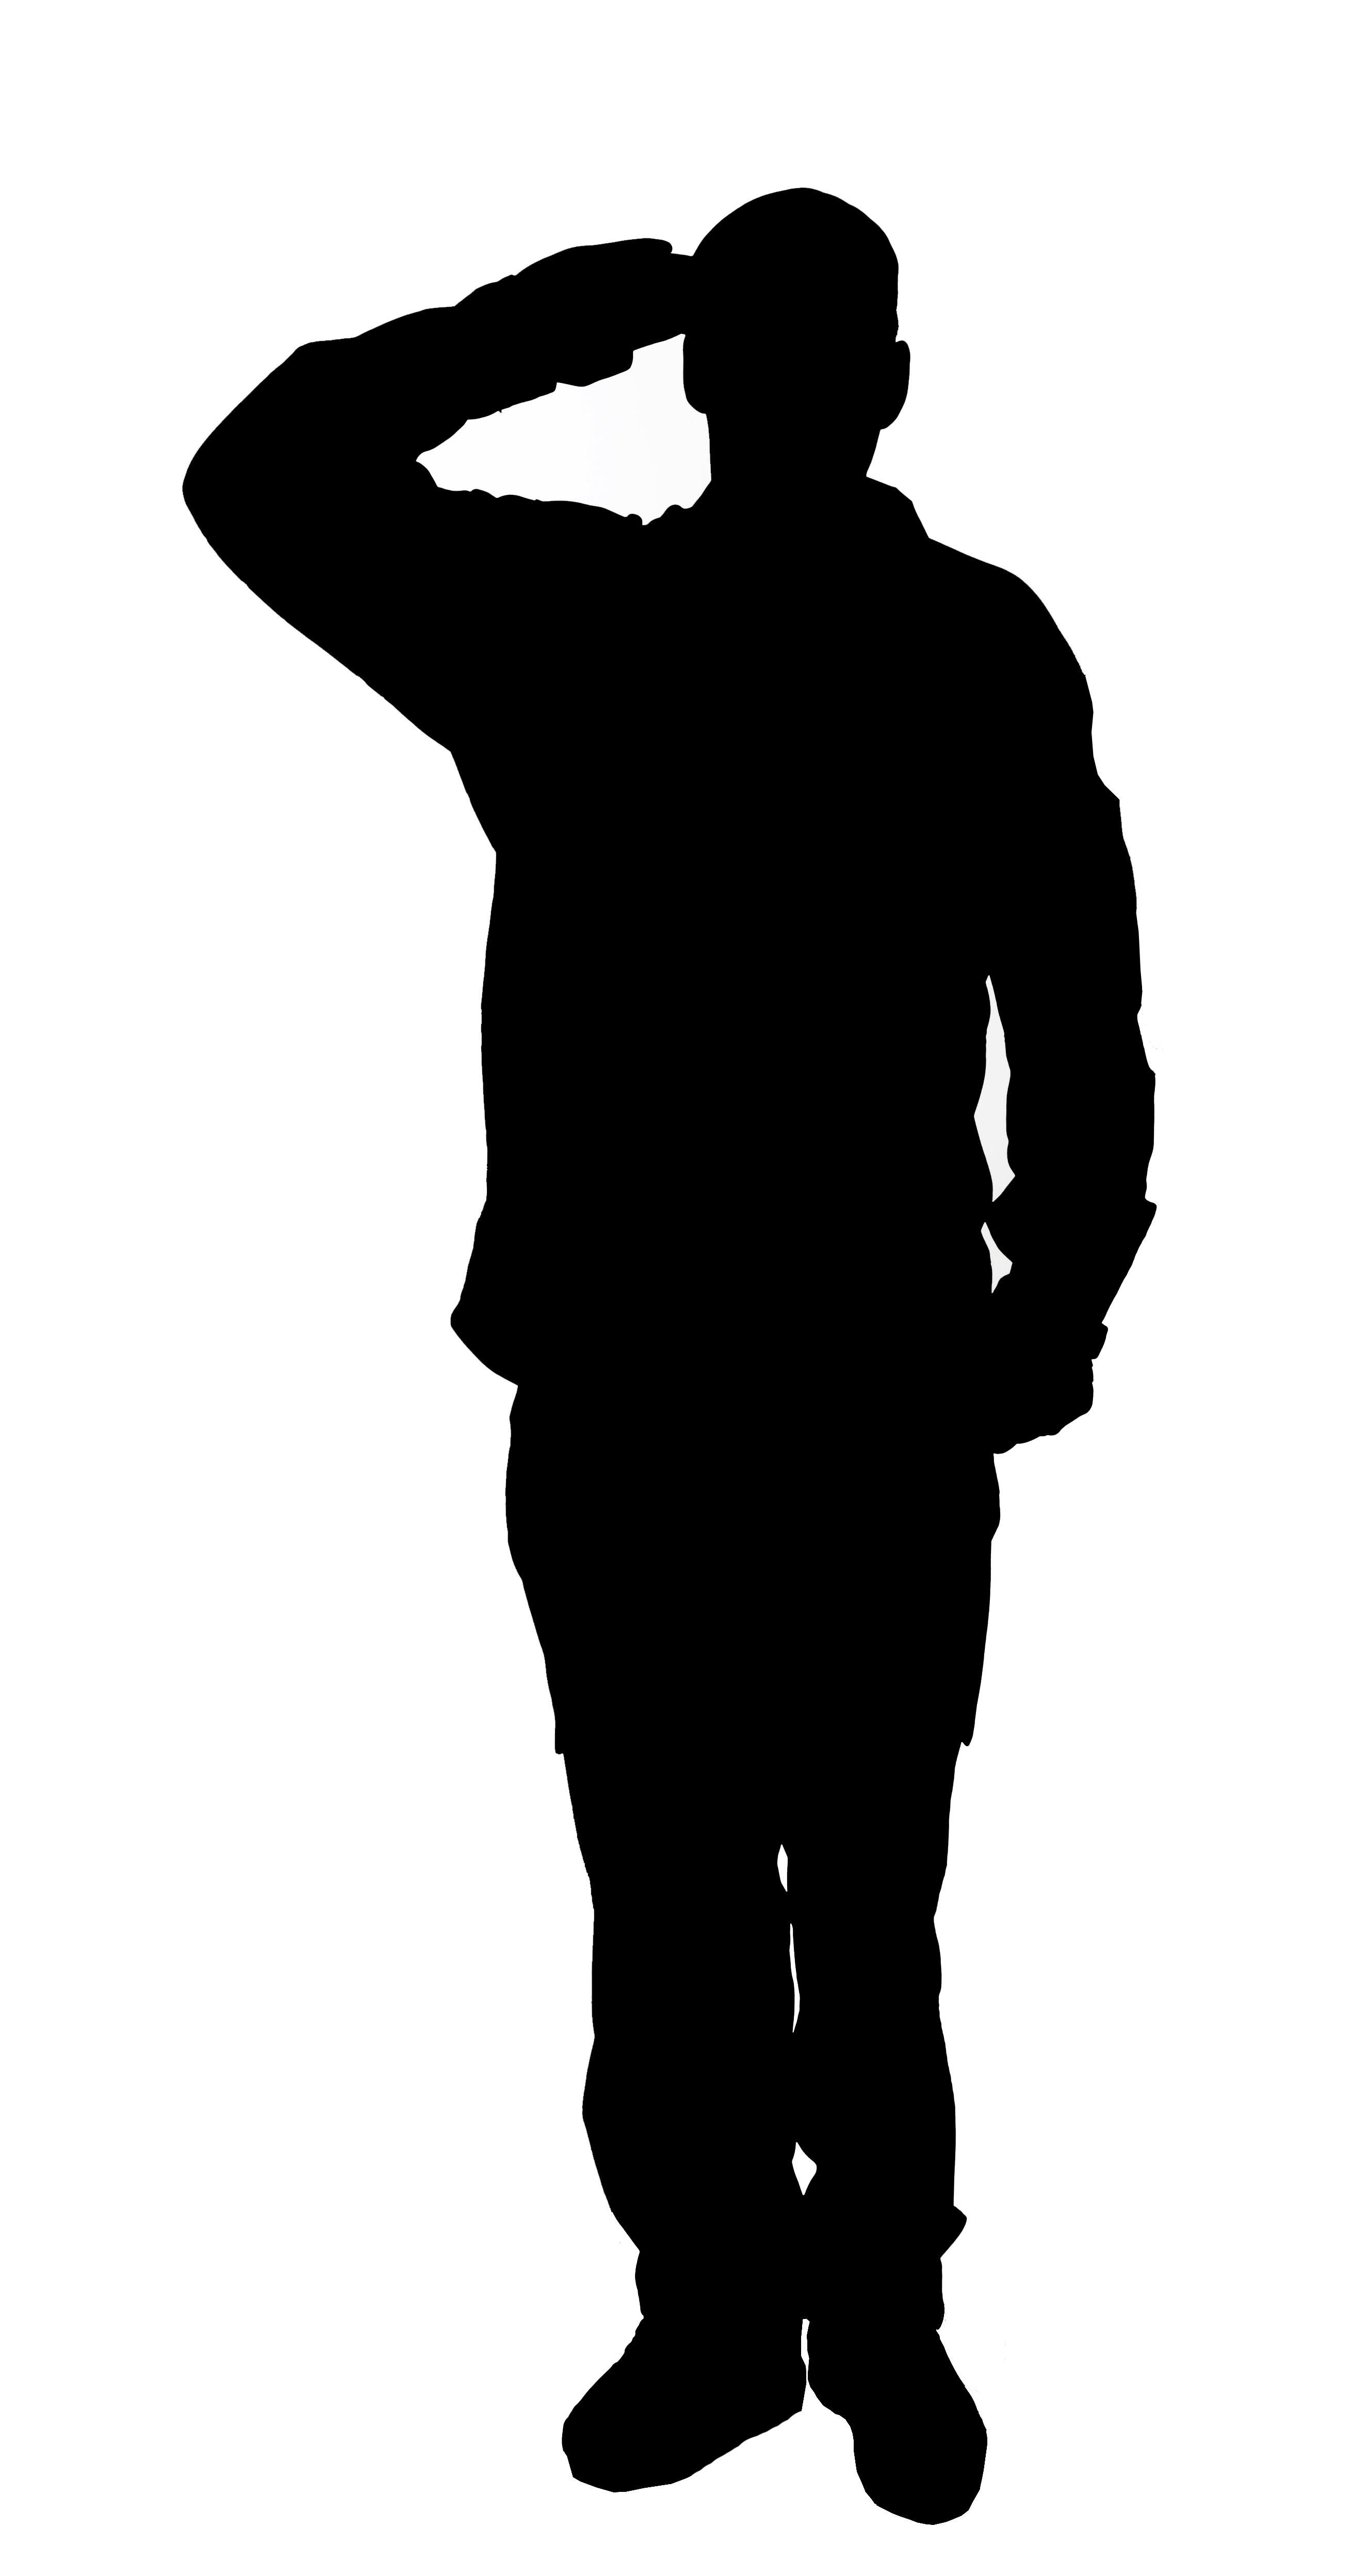 Soldier clipart silhouette